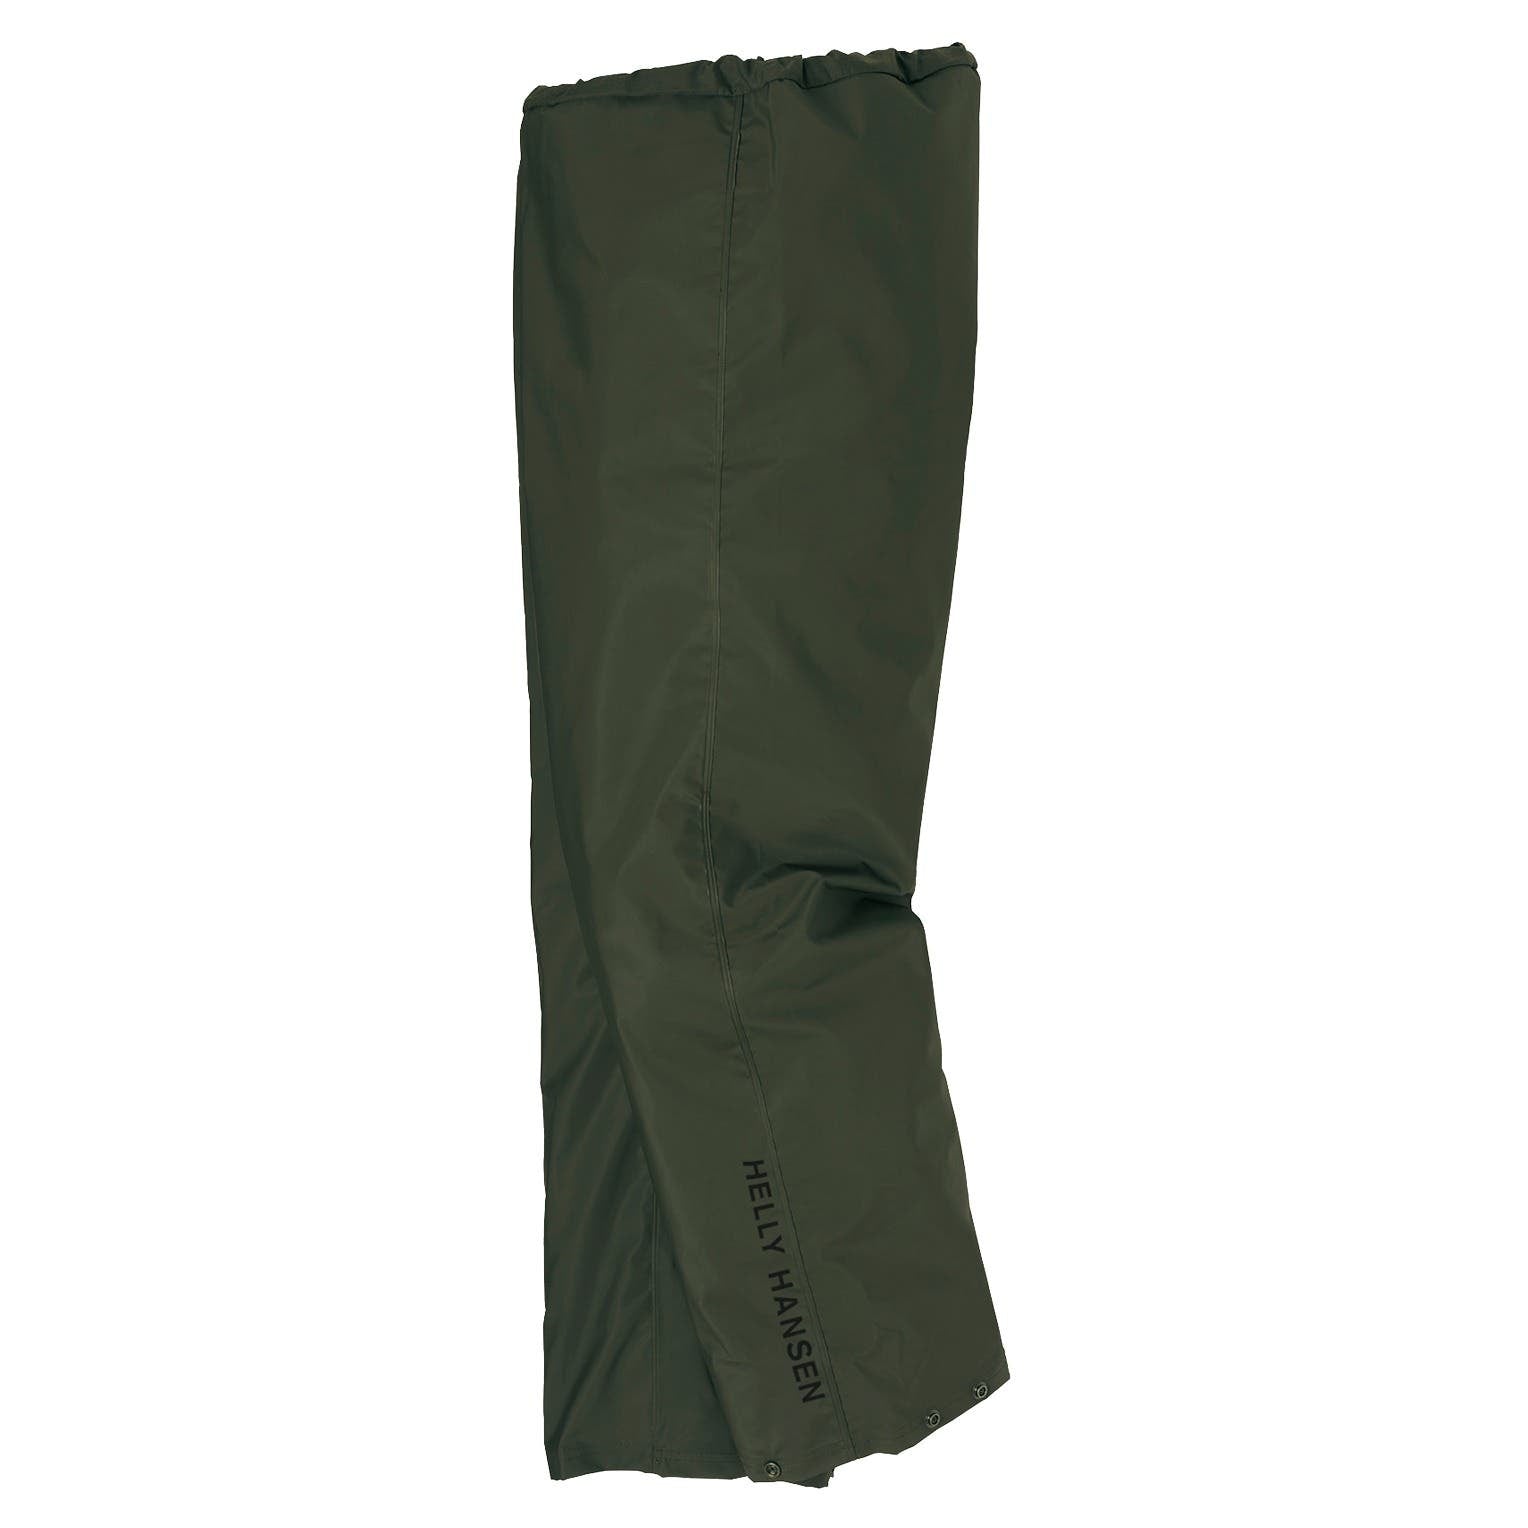 Helly Hansen Men's Mandal Rain Pant in Army Green from the side